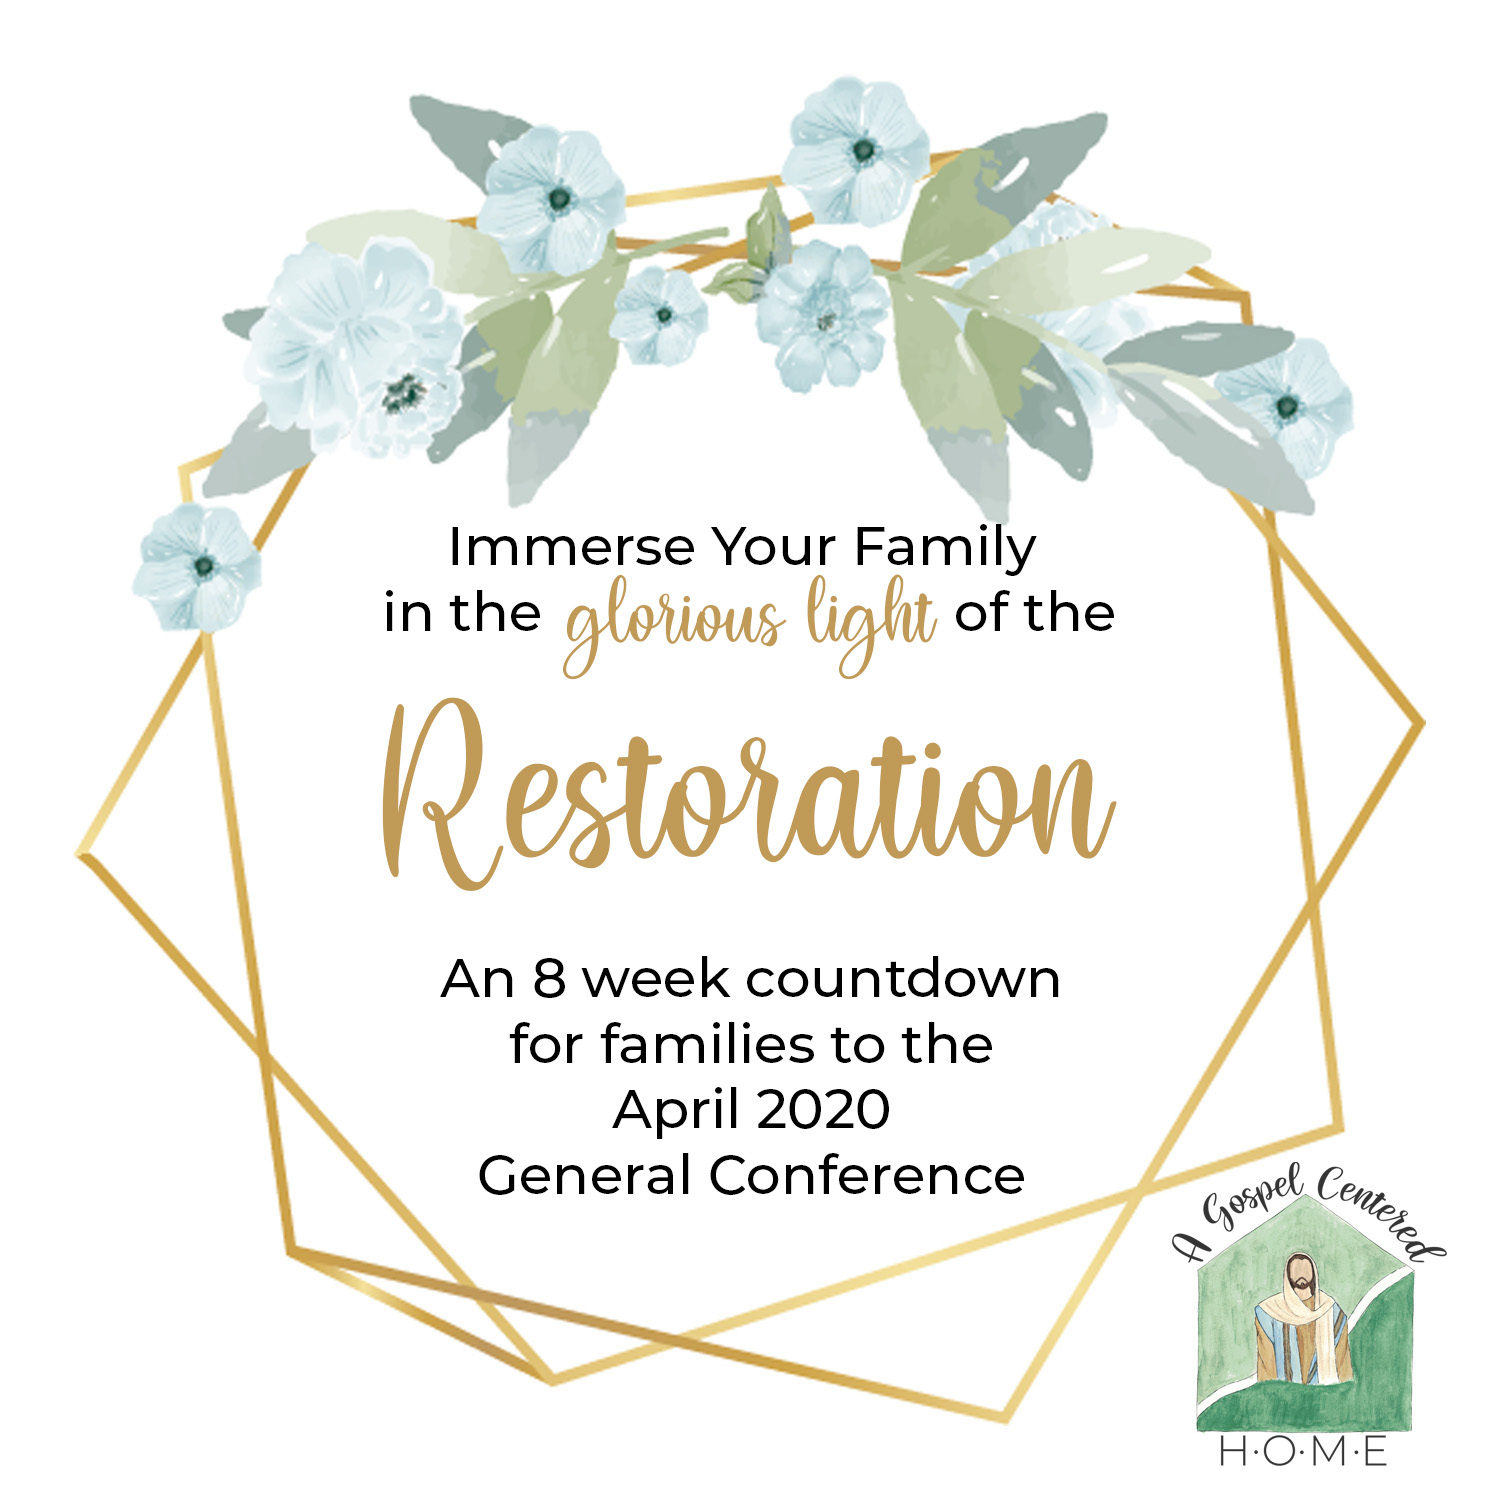 Immerse Your Family in the glorious light of the Restoration. An 8 Week Countdown for Families to the April 2020 General Conference